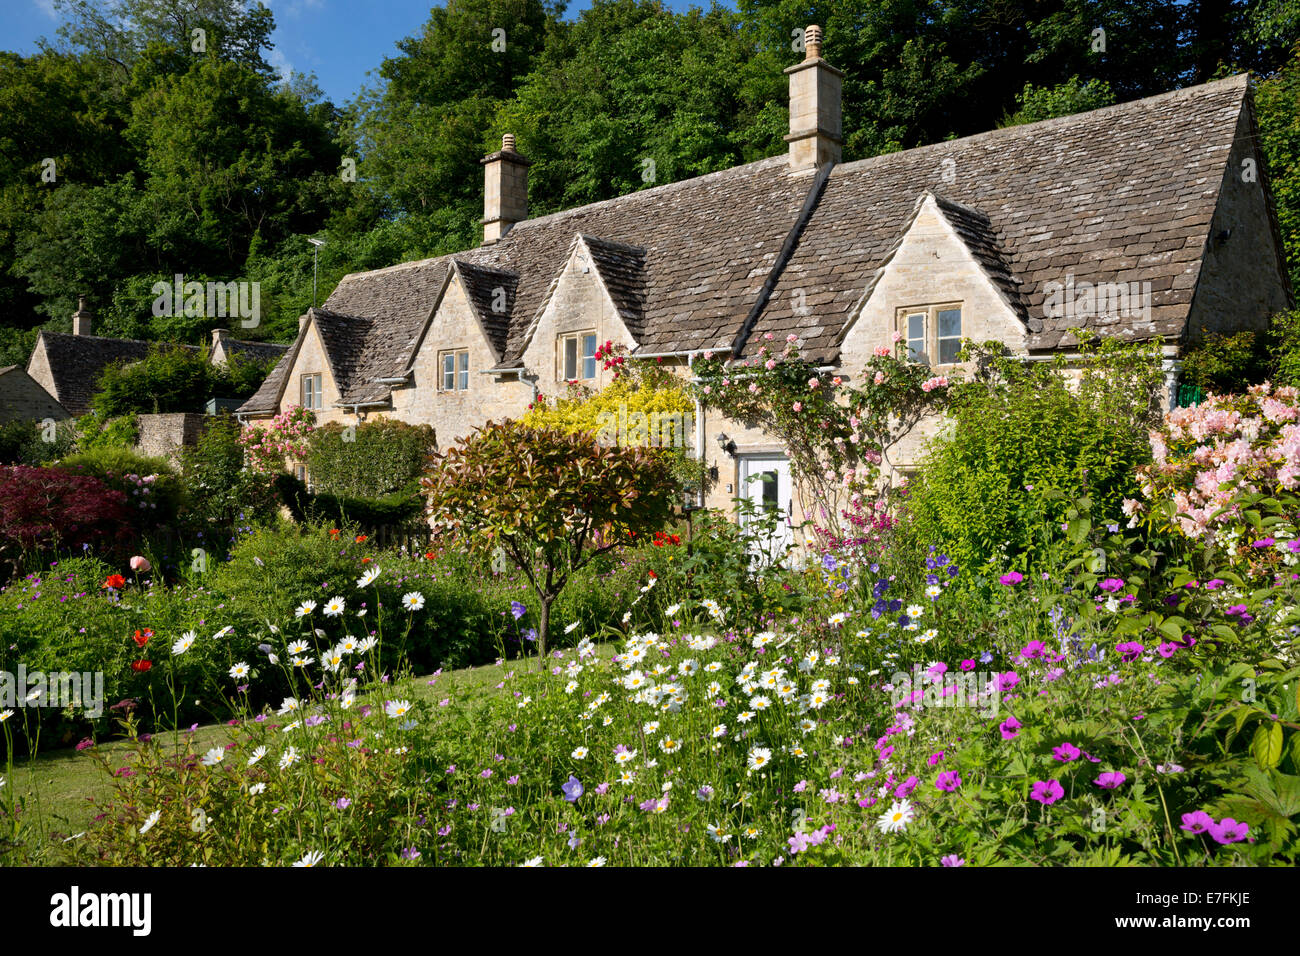 Cotswold cottages and summer garden, Bibury, Cotswolds, Gloucestershire ...